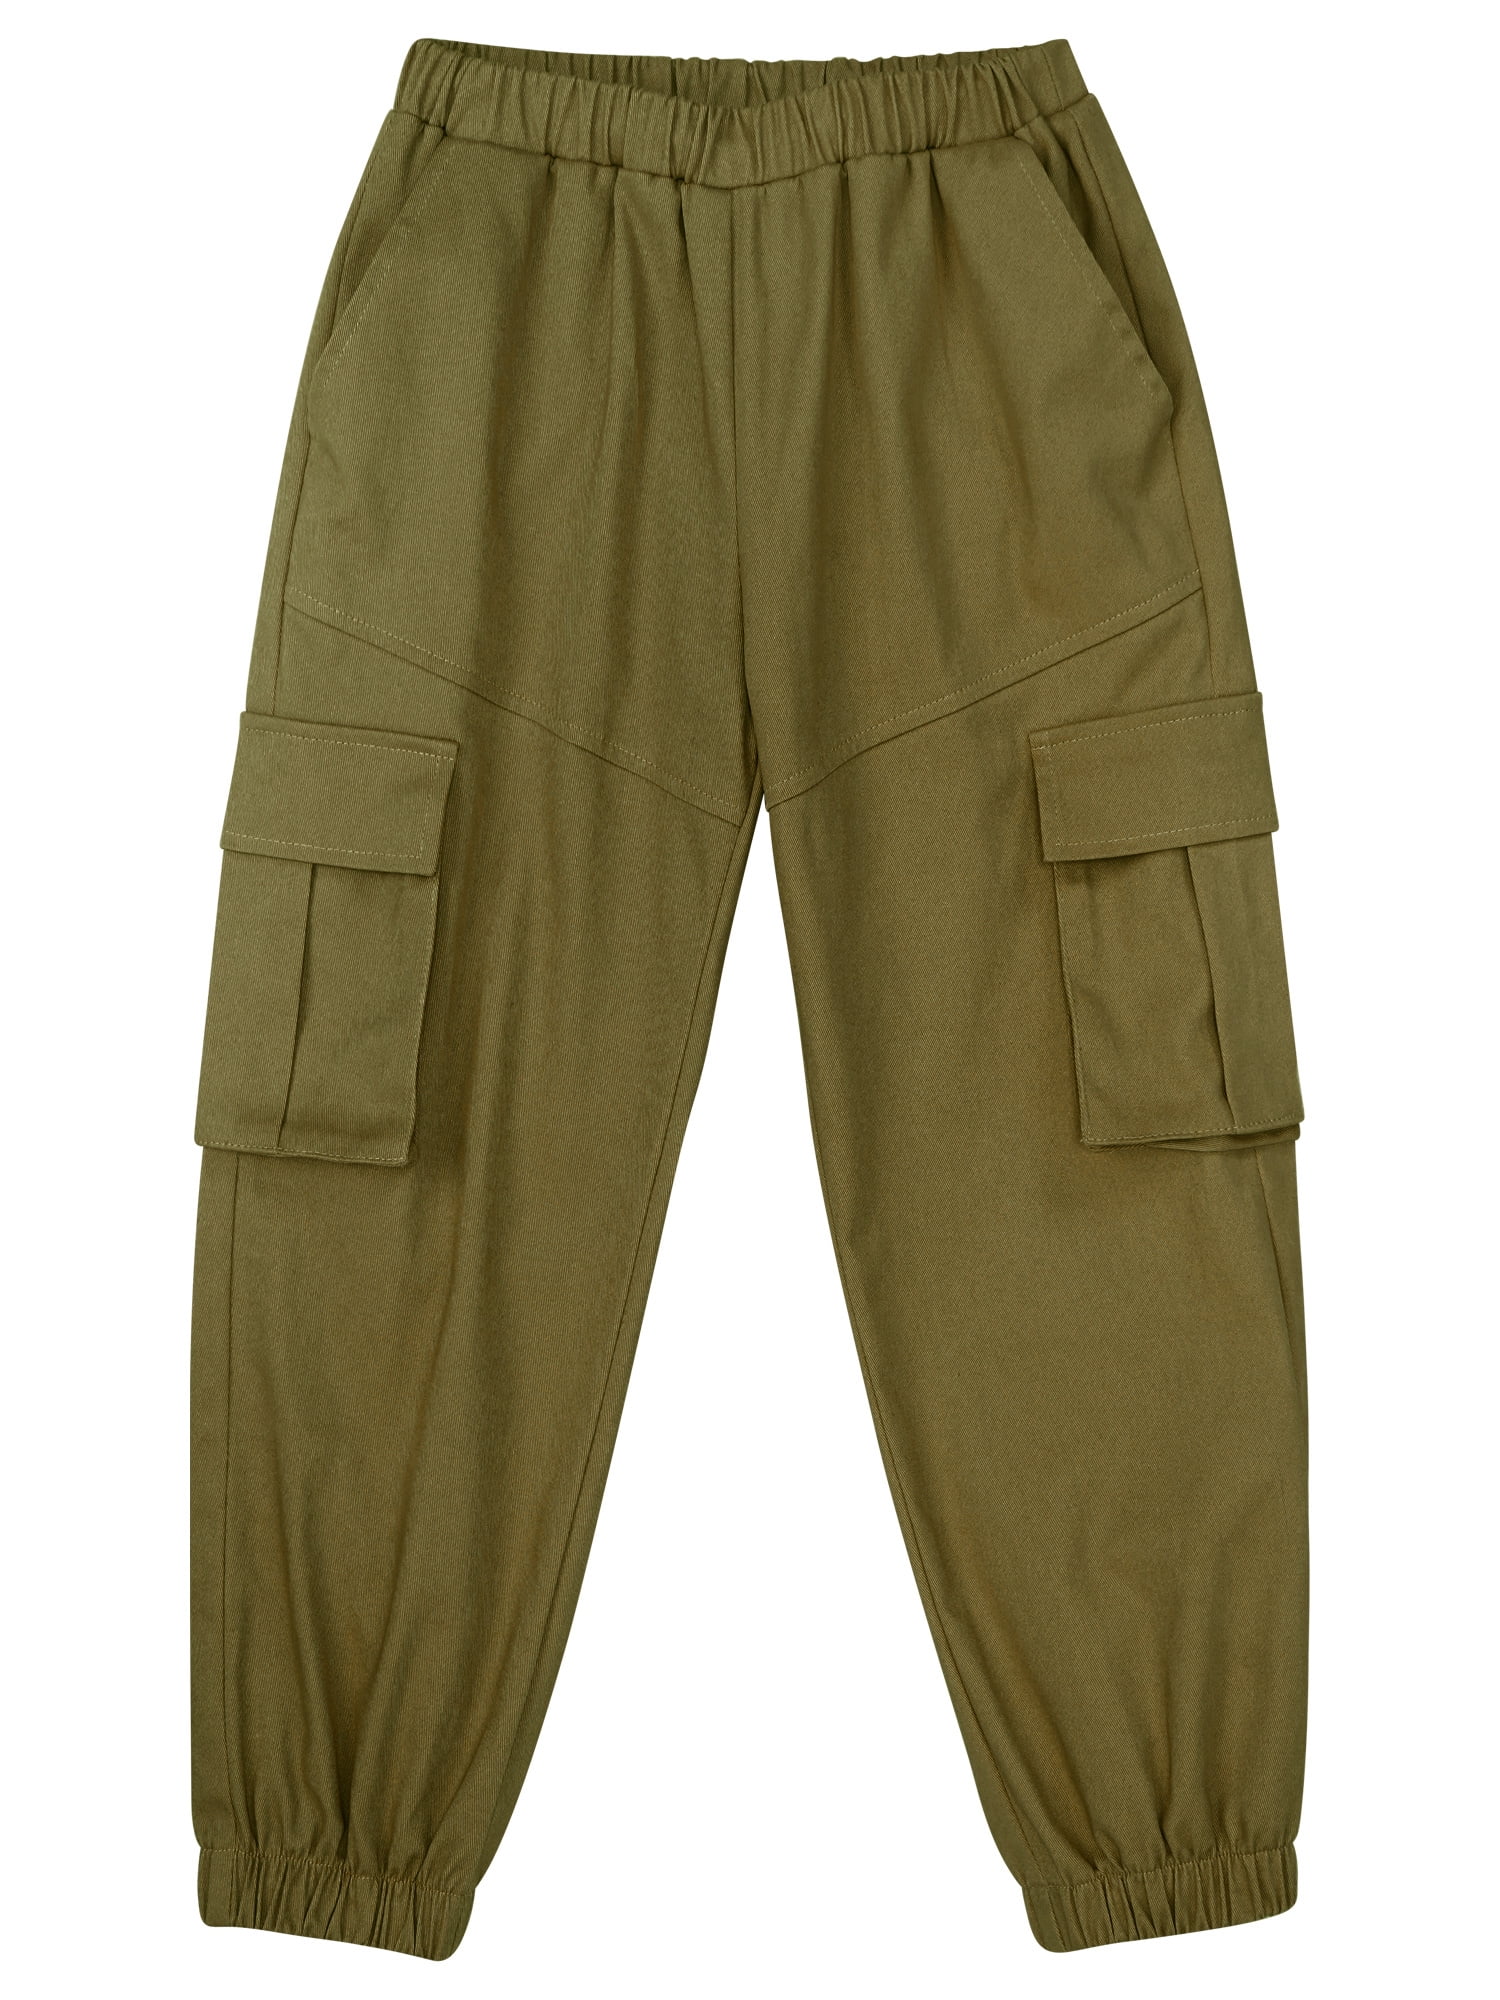 YiZYiF Kids Boys Dungarees Casual Moisture-Wicking Cargo Pants,Sizes 6-14  Army Green 14